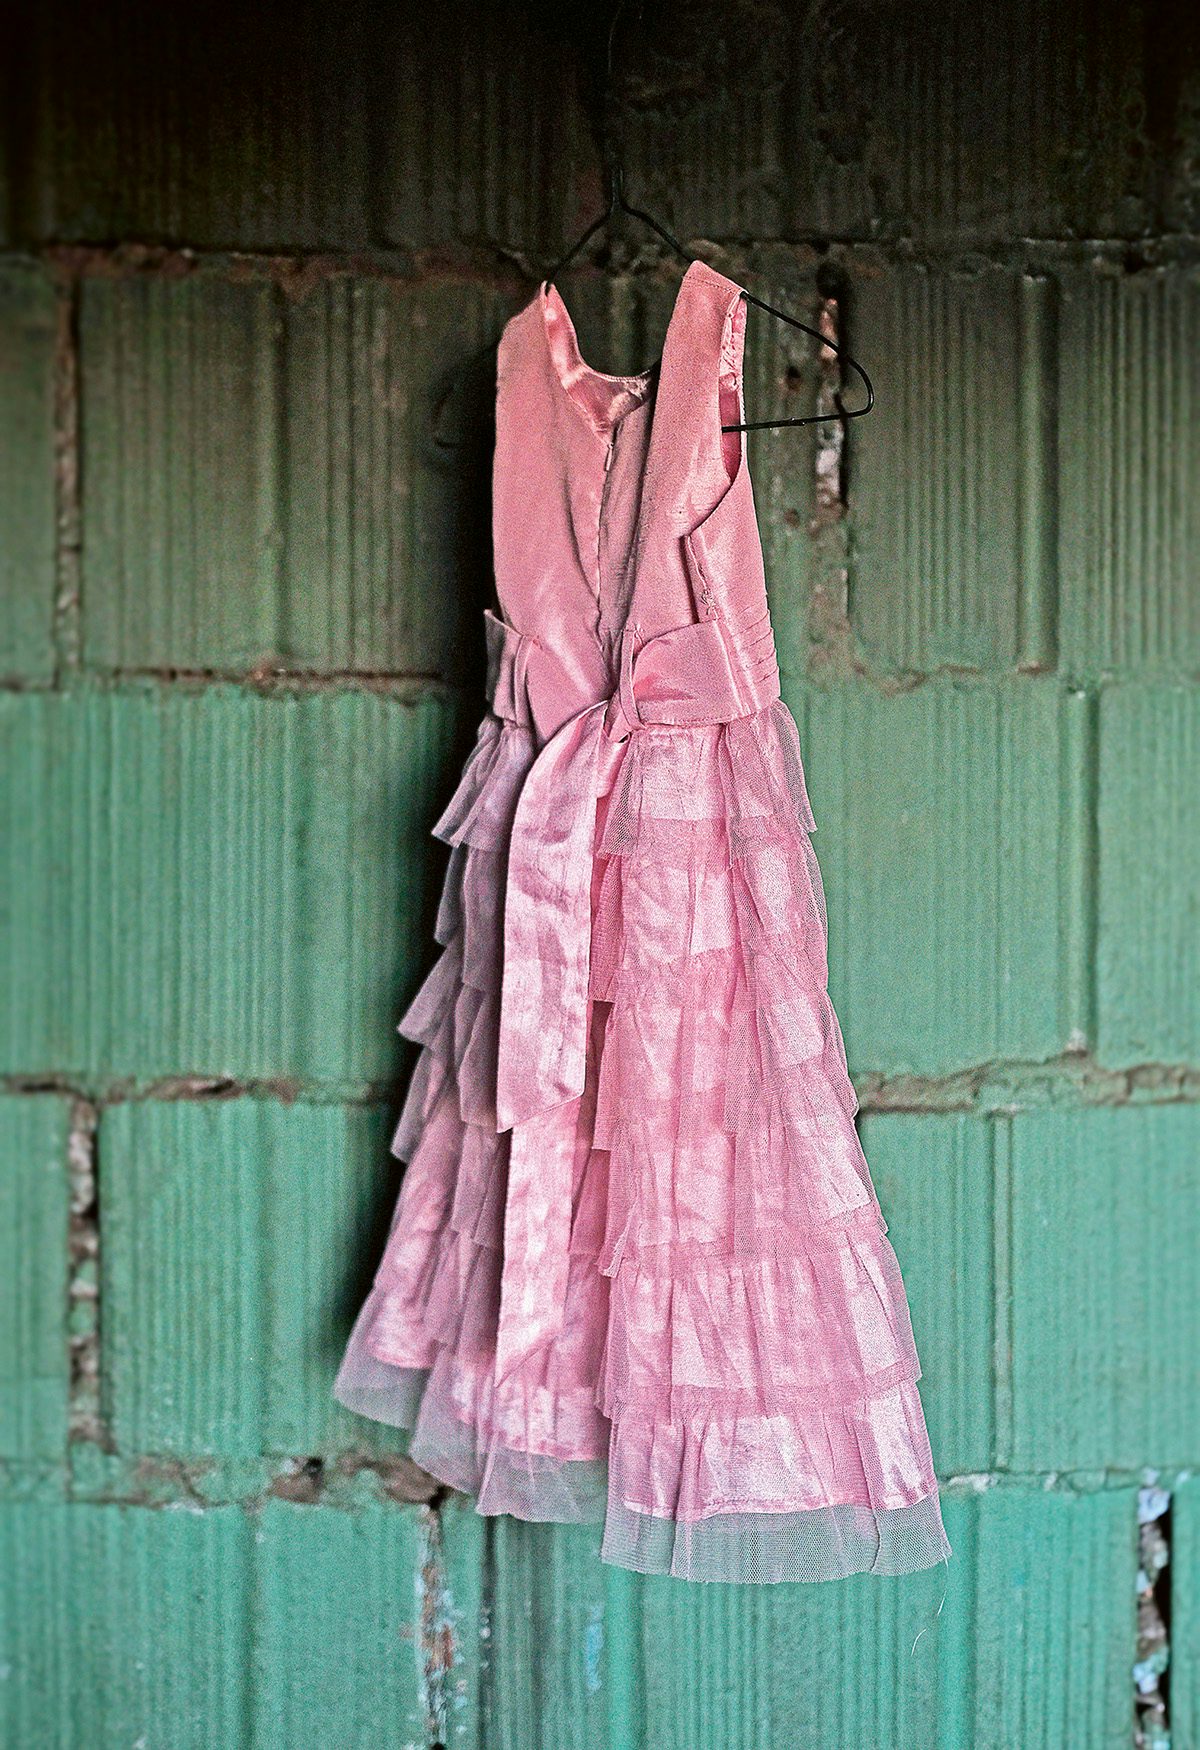 A pink tiered dress with a bow hanging on a wire hanger in front of a green wall